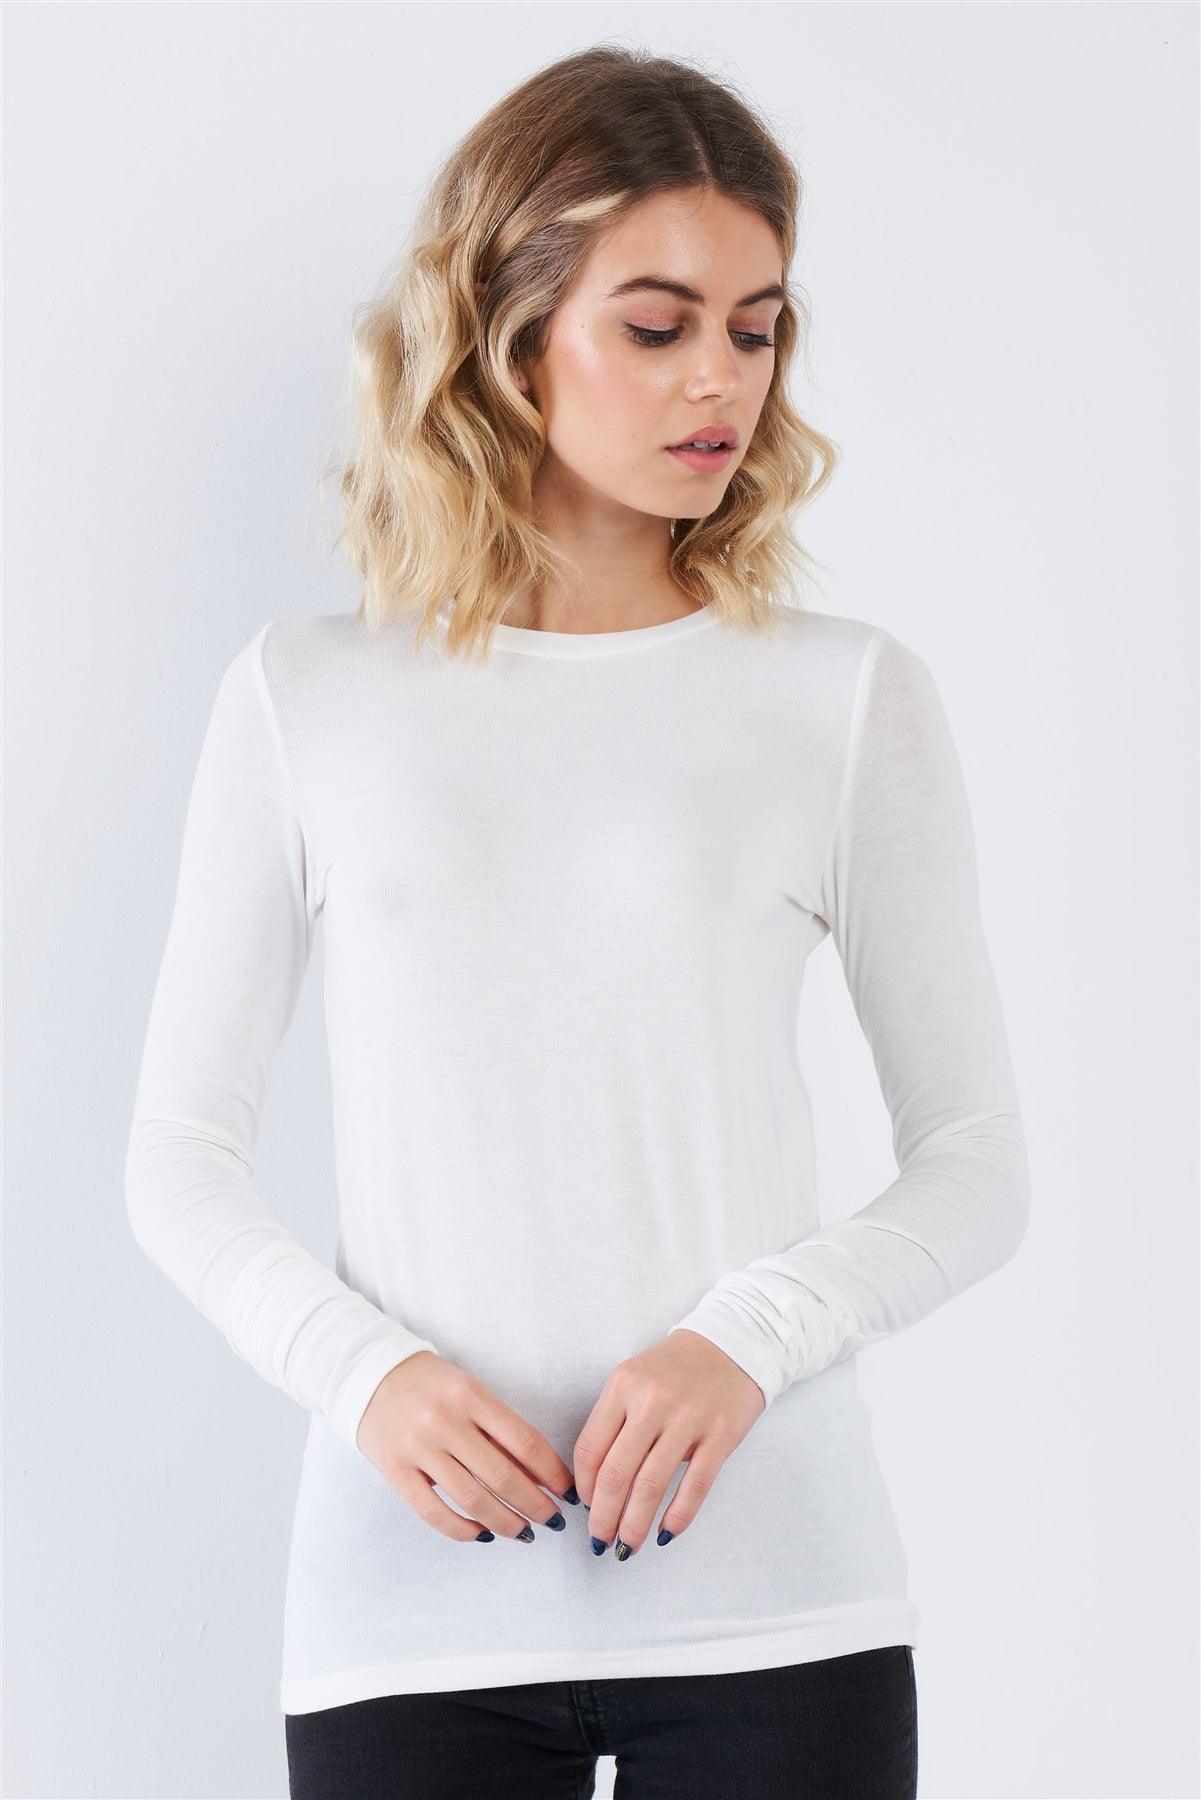 Off-White Casual Basic Long Sleeve Stretchy Bodycon Top  /3-2-1